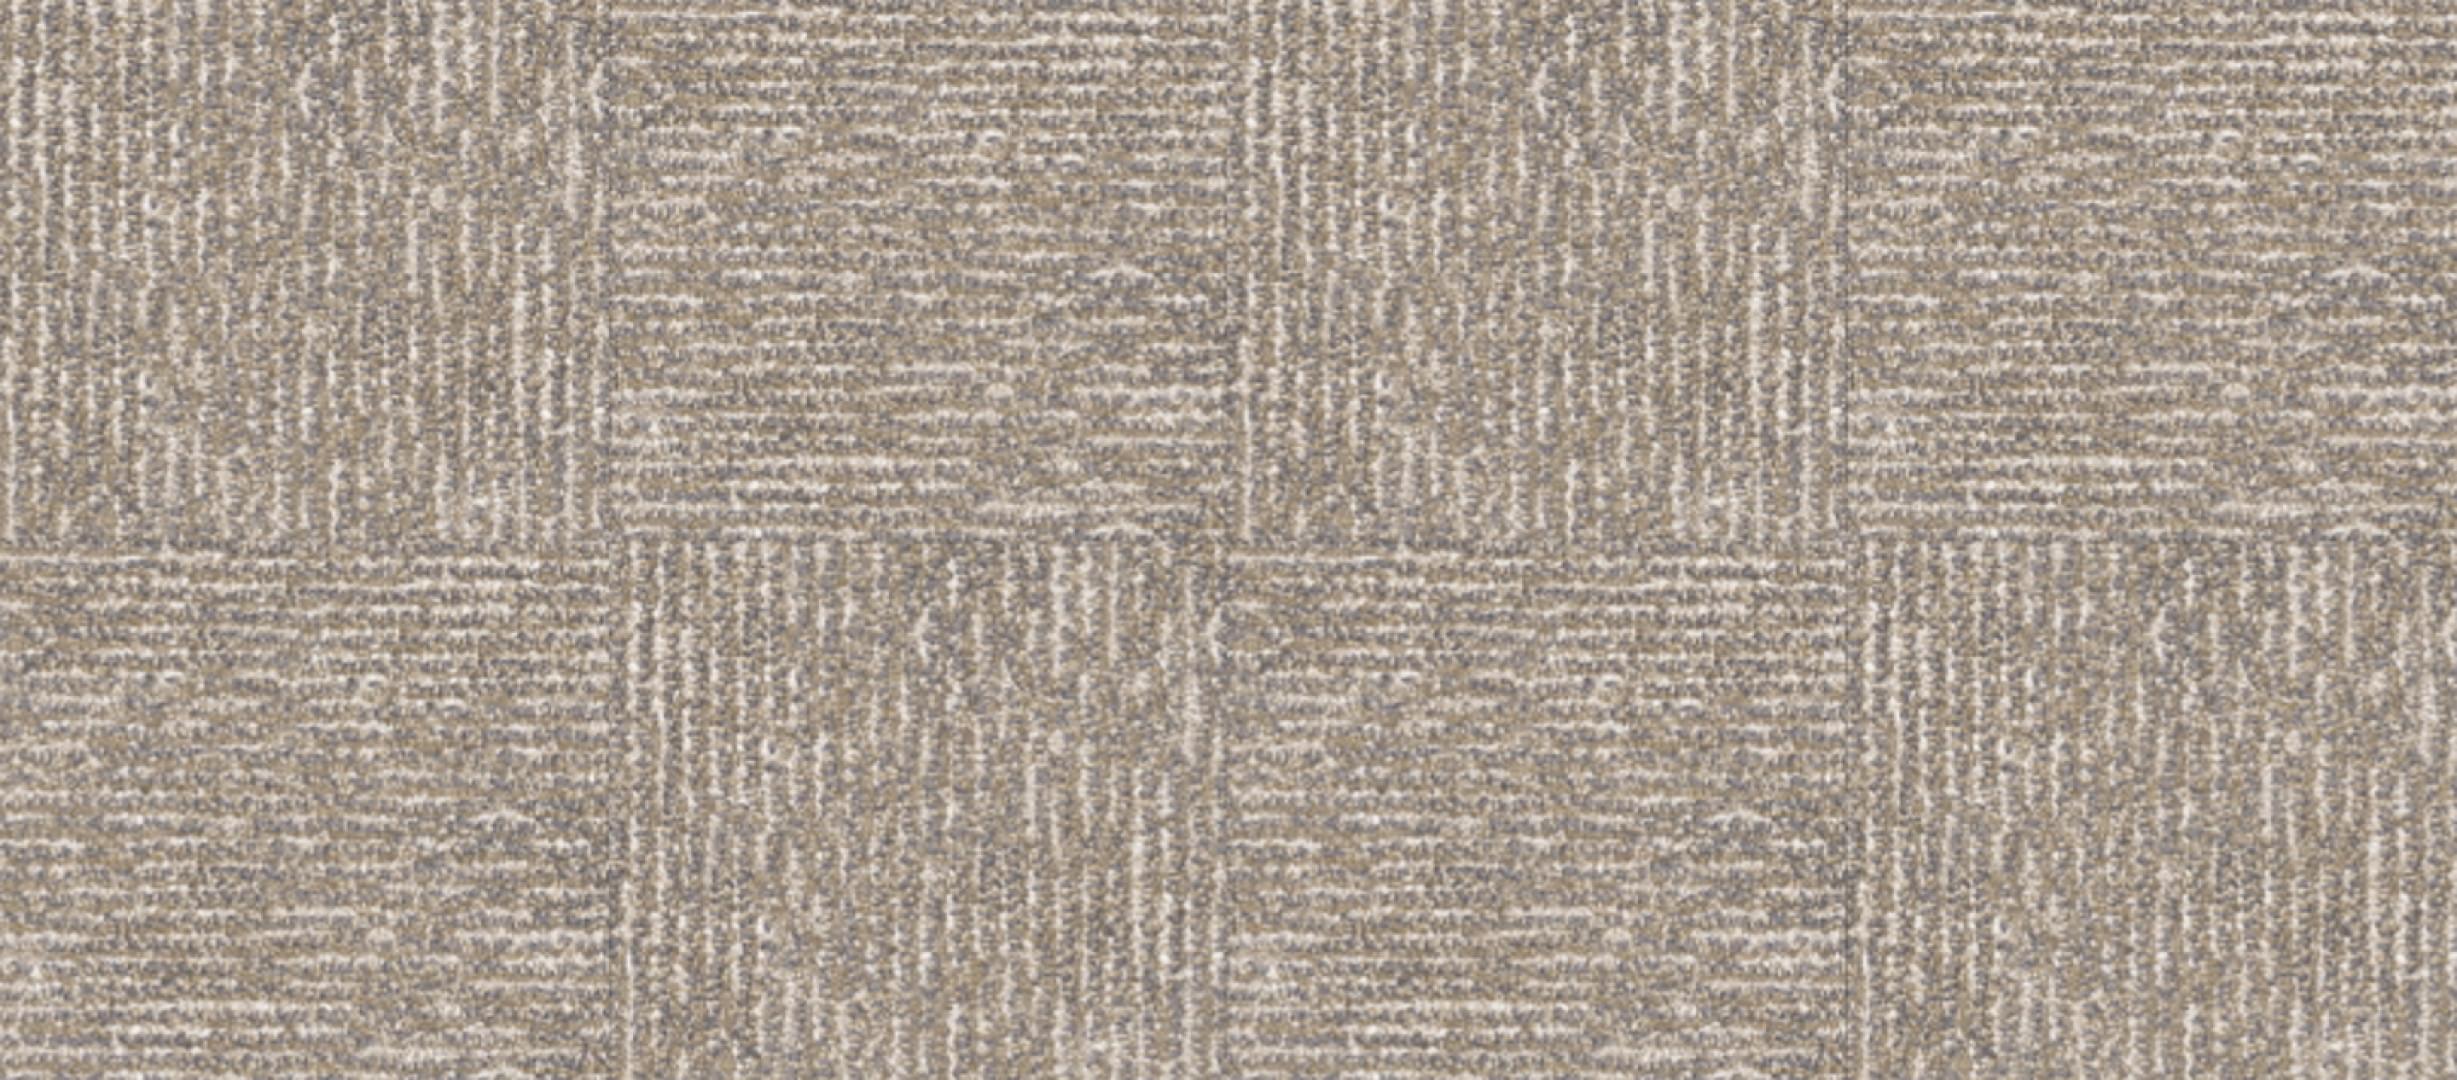 MTS 4423 Oriole Brown Gray from Hyundai Flooring